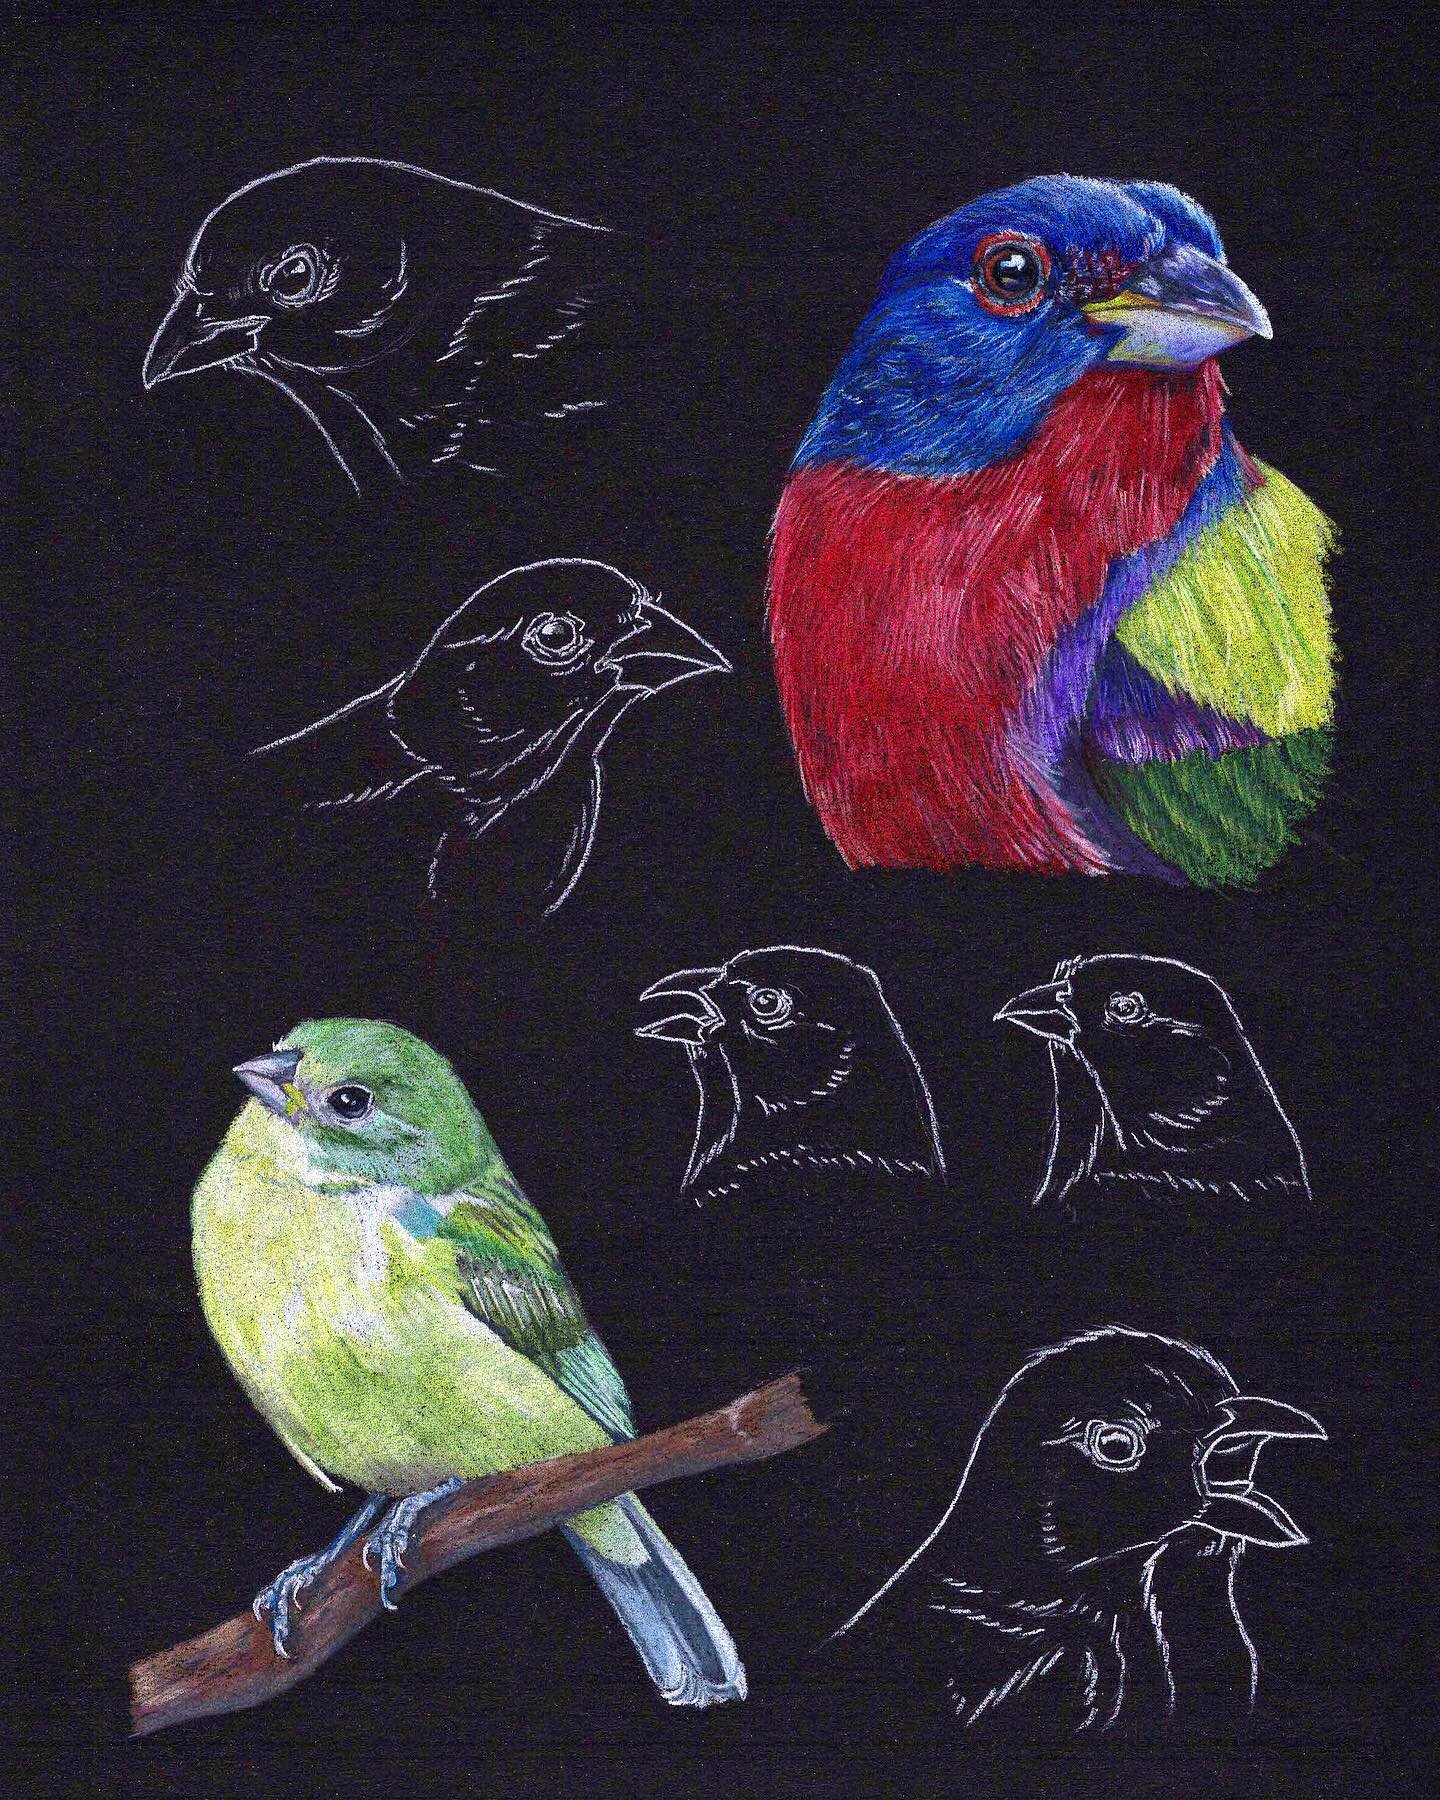 Apparently I never shared this Painted Bunting study despite drawing it nearly 6 months ago 🙀 but I remembered it today when @coreylovescolor shared a photo of a male and female Painted Bunting visiting her feeder! If you&rsquo;ve never seen one in 